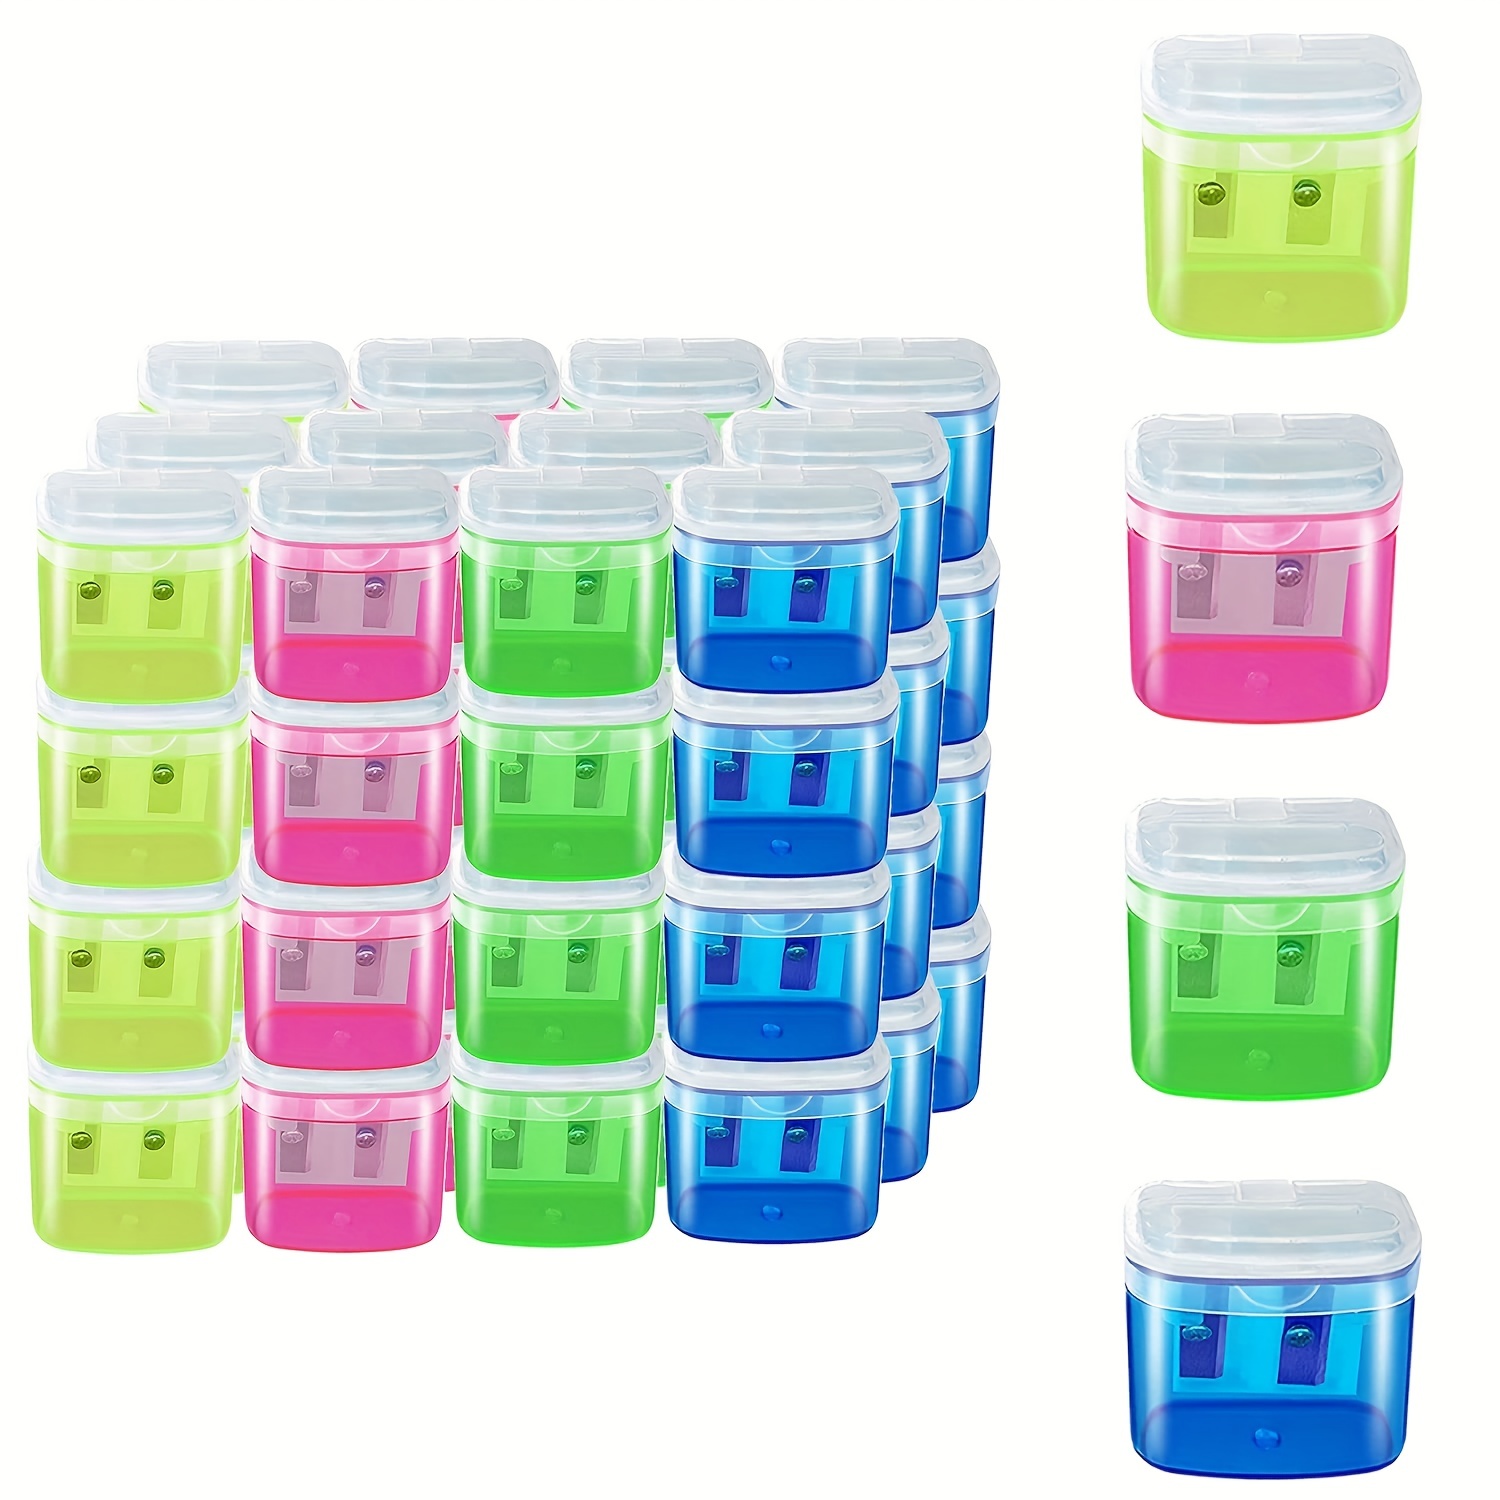 ForTomorrow Manual Pencil Sharpener Bulk - 24 Pack Small Colored Handheld  Dual Hole Pencil Sharpeners with Lid for Kids, School Classroom